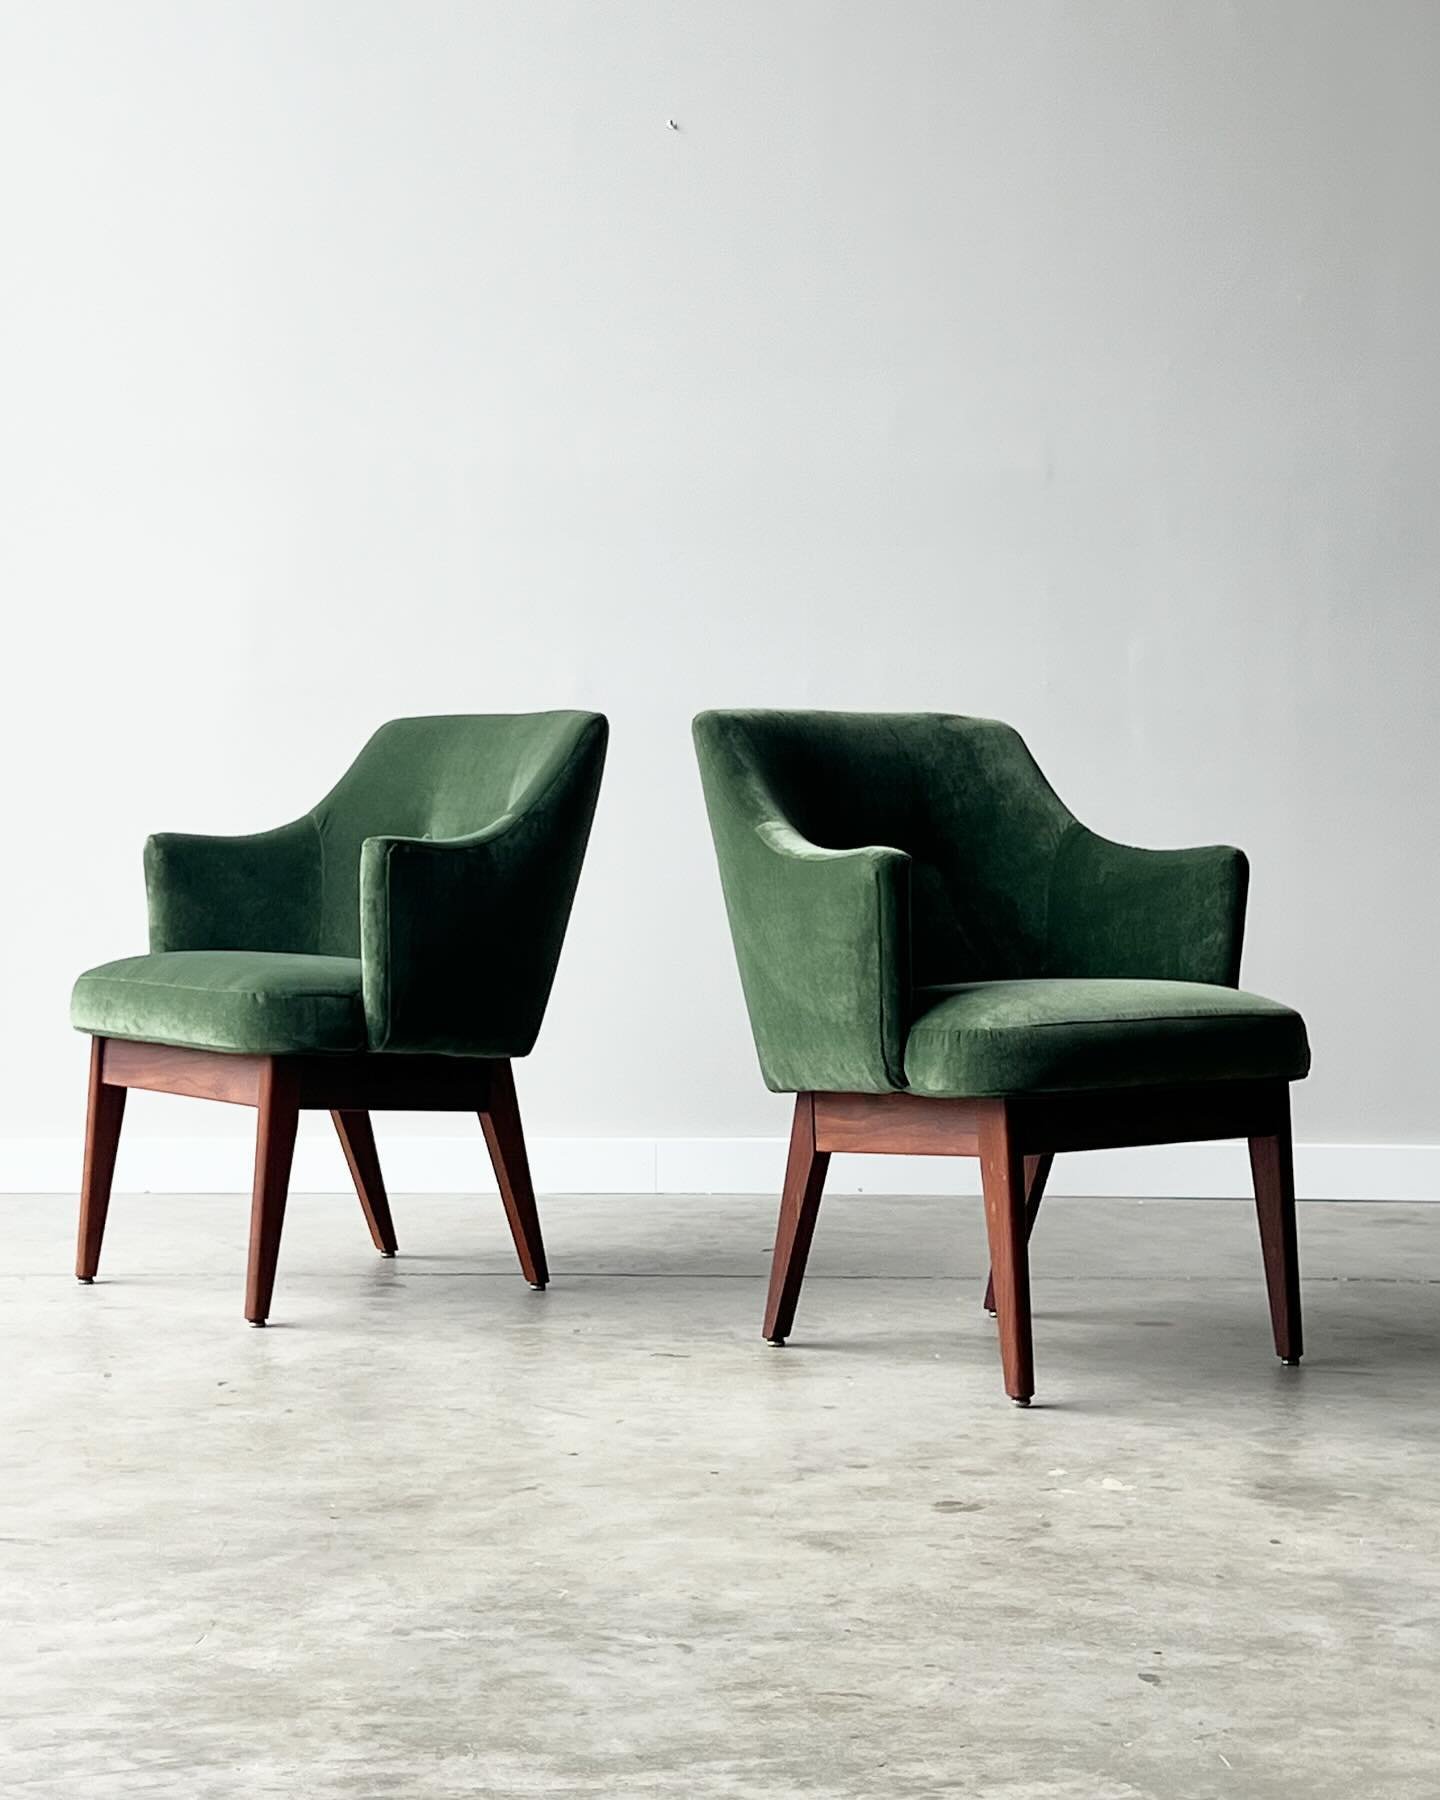 Available ~ Mid-century pair of lounges or accent chairs in the style of Adrian Pearsall. This pair has been newly reupholstered in a forest green soft velvet fabric with two accent buttons on the backrest. They sit on a walnut base with tapered waln